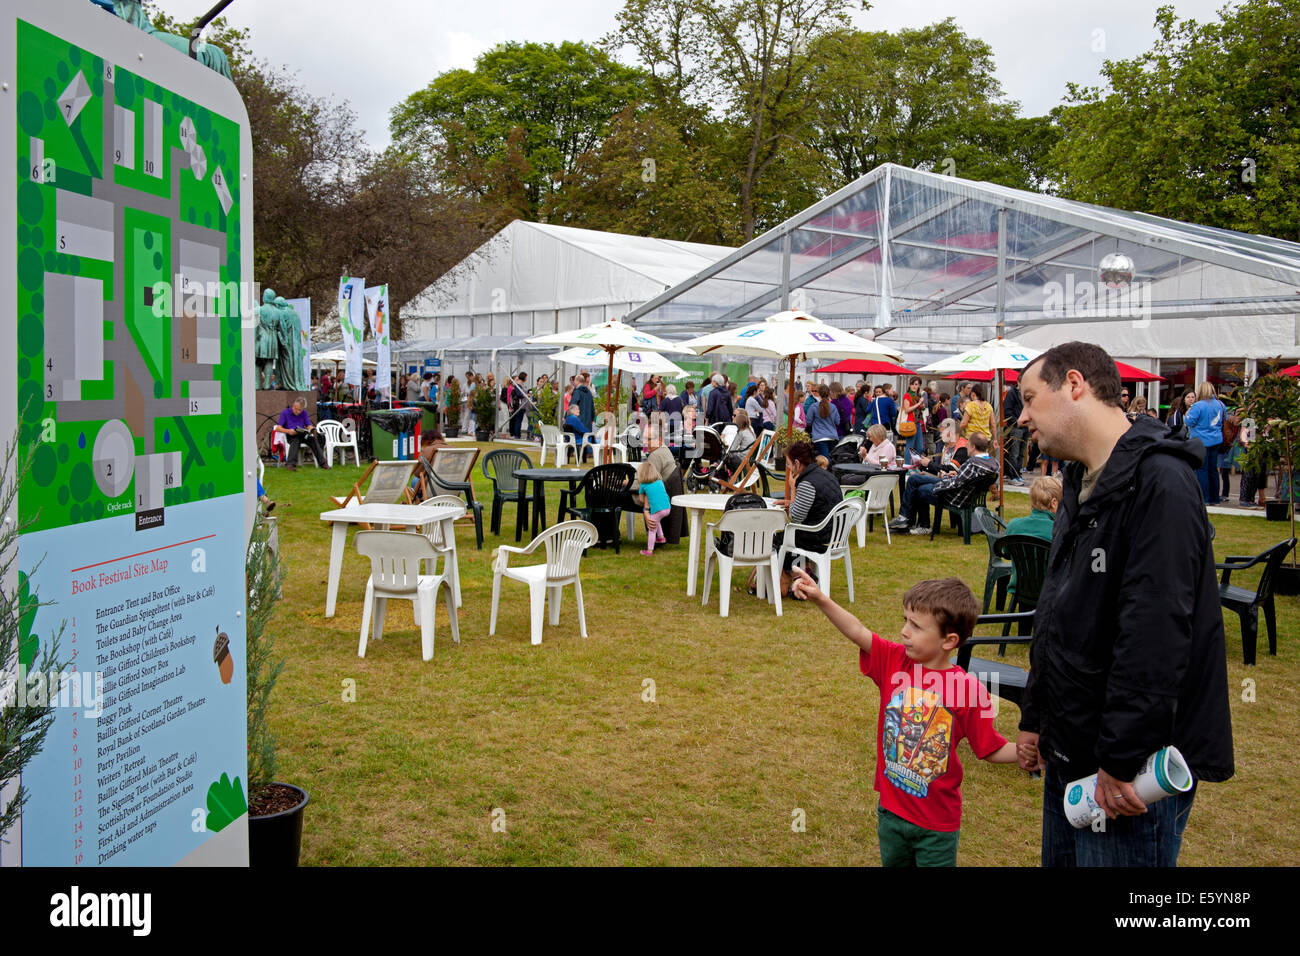 Edinburgh, Scotland, UK, 9th August 2014, opening day of Edinburgh Book Festival, Charlotte Square. Visitors relax in the gardens while watching Edinburgh Samba Band and view the map to find their way around the festival. Stock Photo